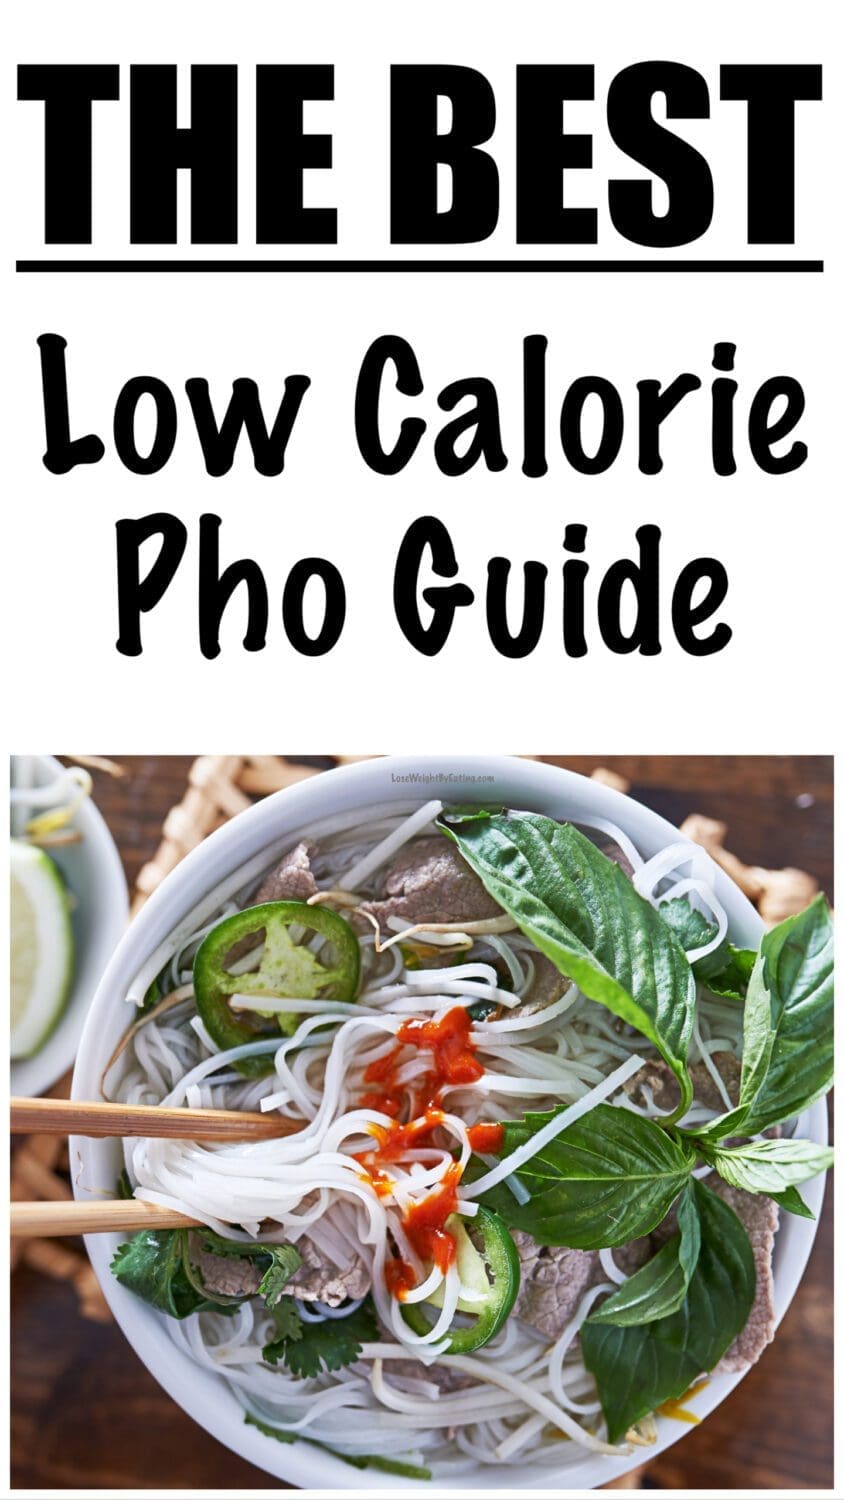 calories in pho